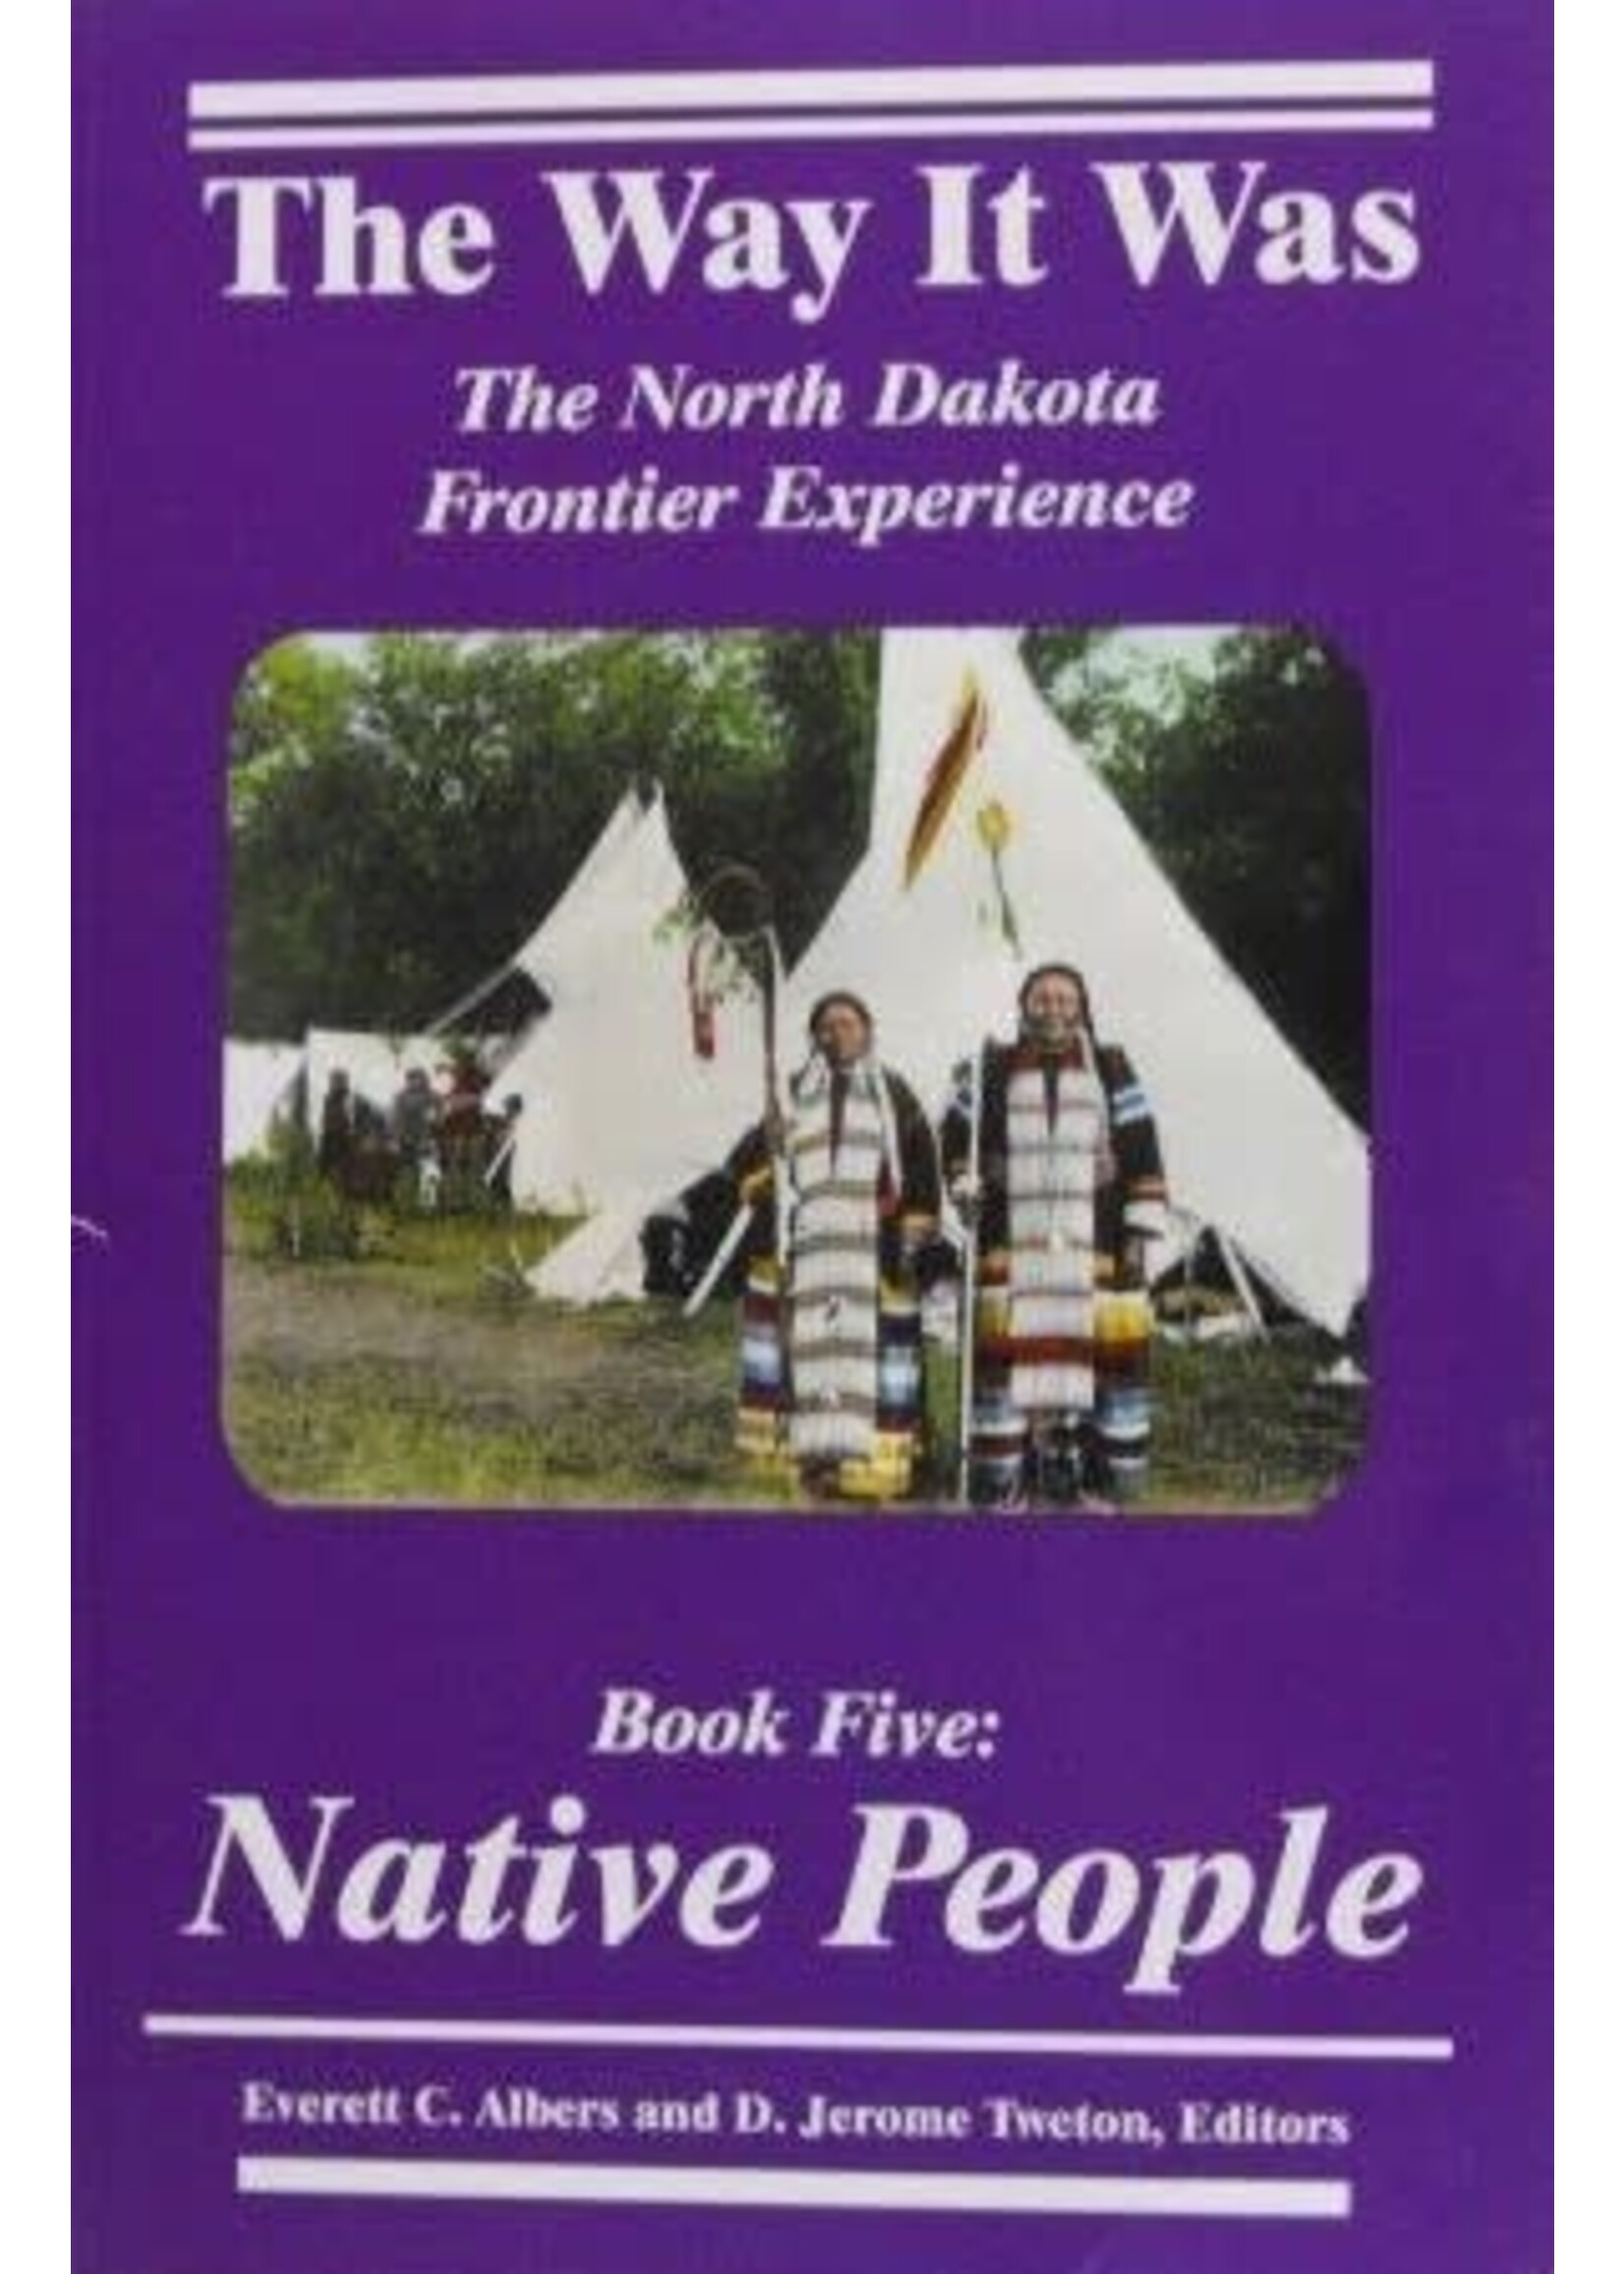 The Way it Was: The North Dakota Frontier Experience: Native People